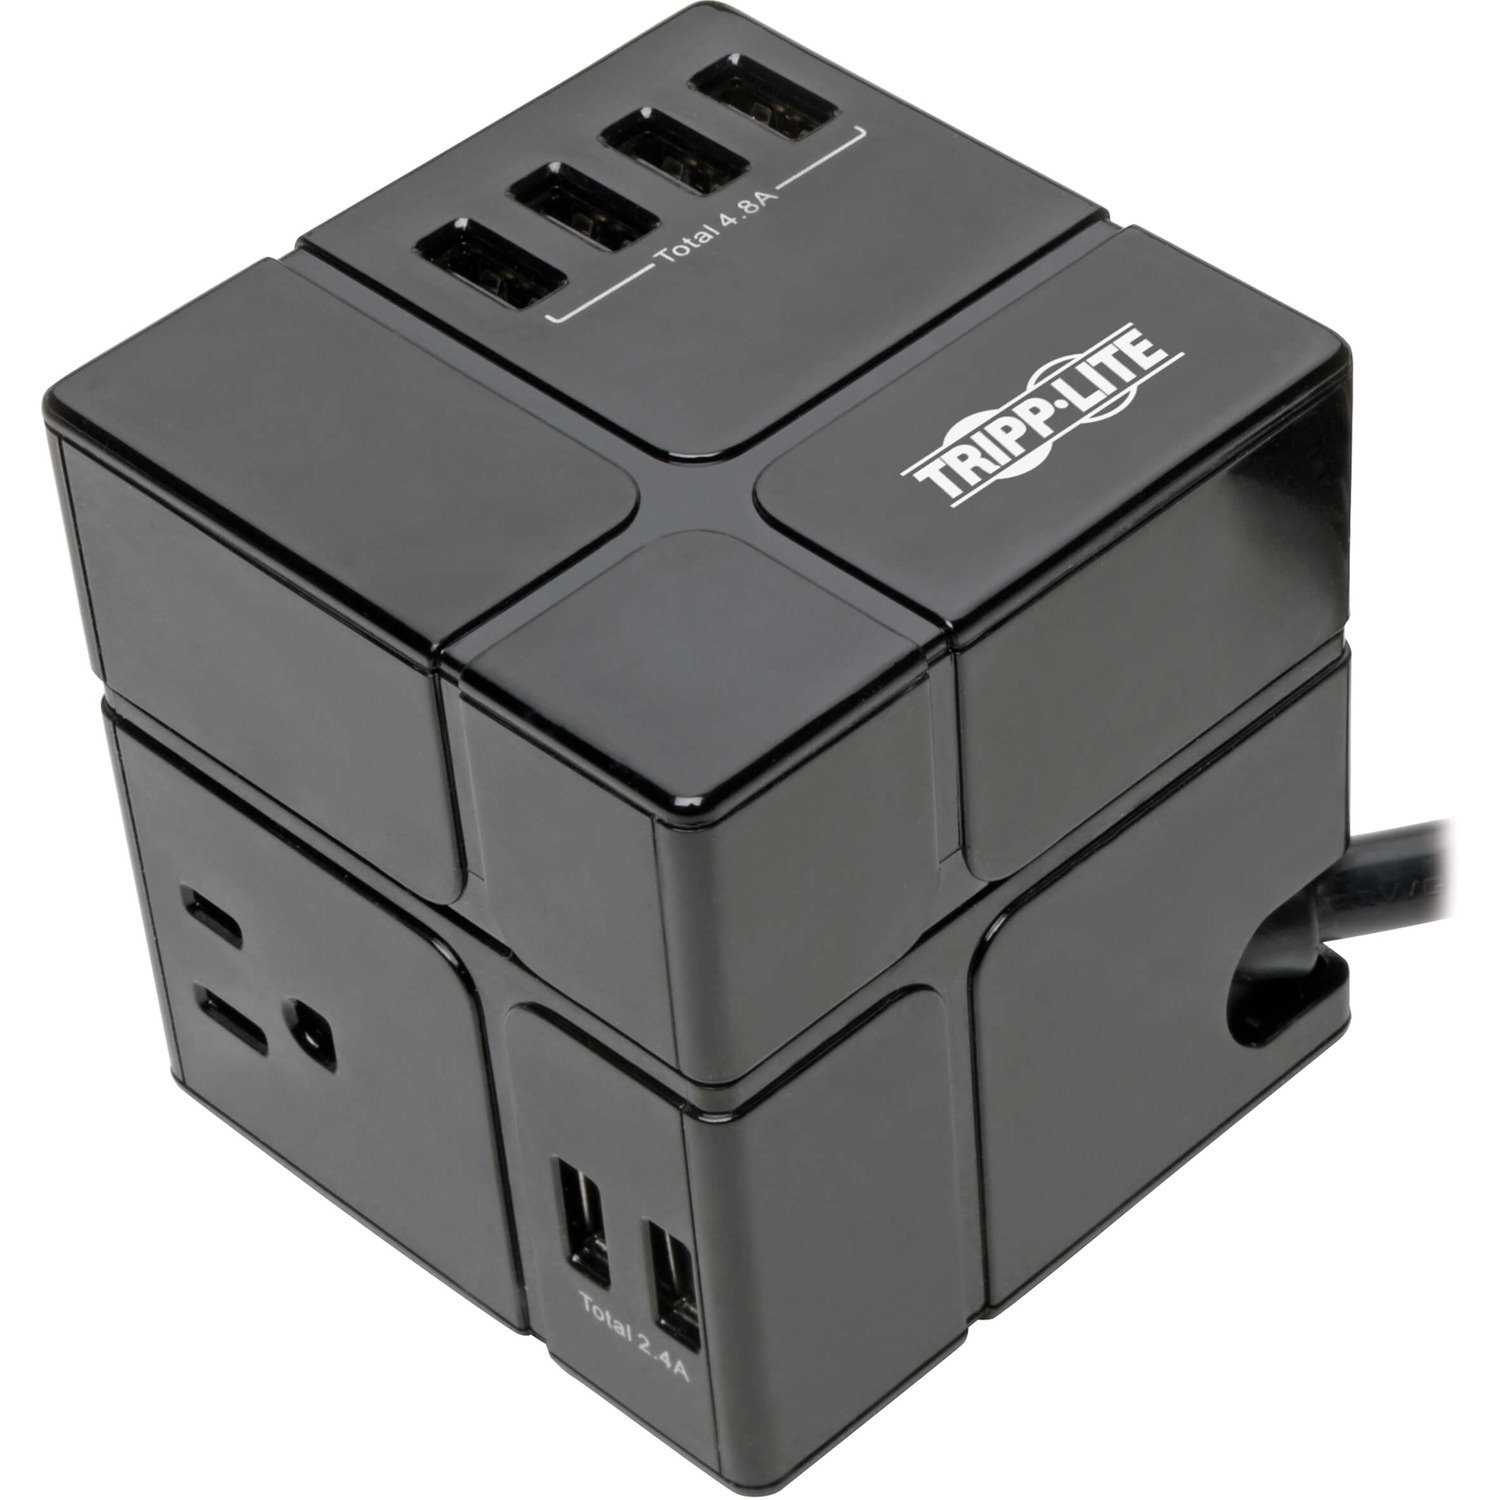 Tripp Lite Safe-IT Cube Surge Protector 3-Outlet 5-15R 6 USB Charging Ports